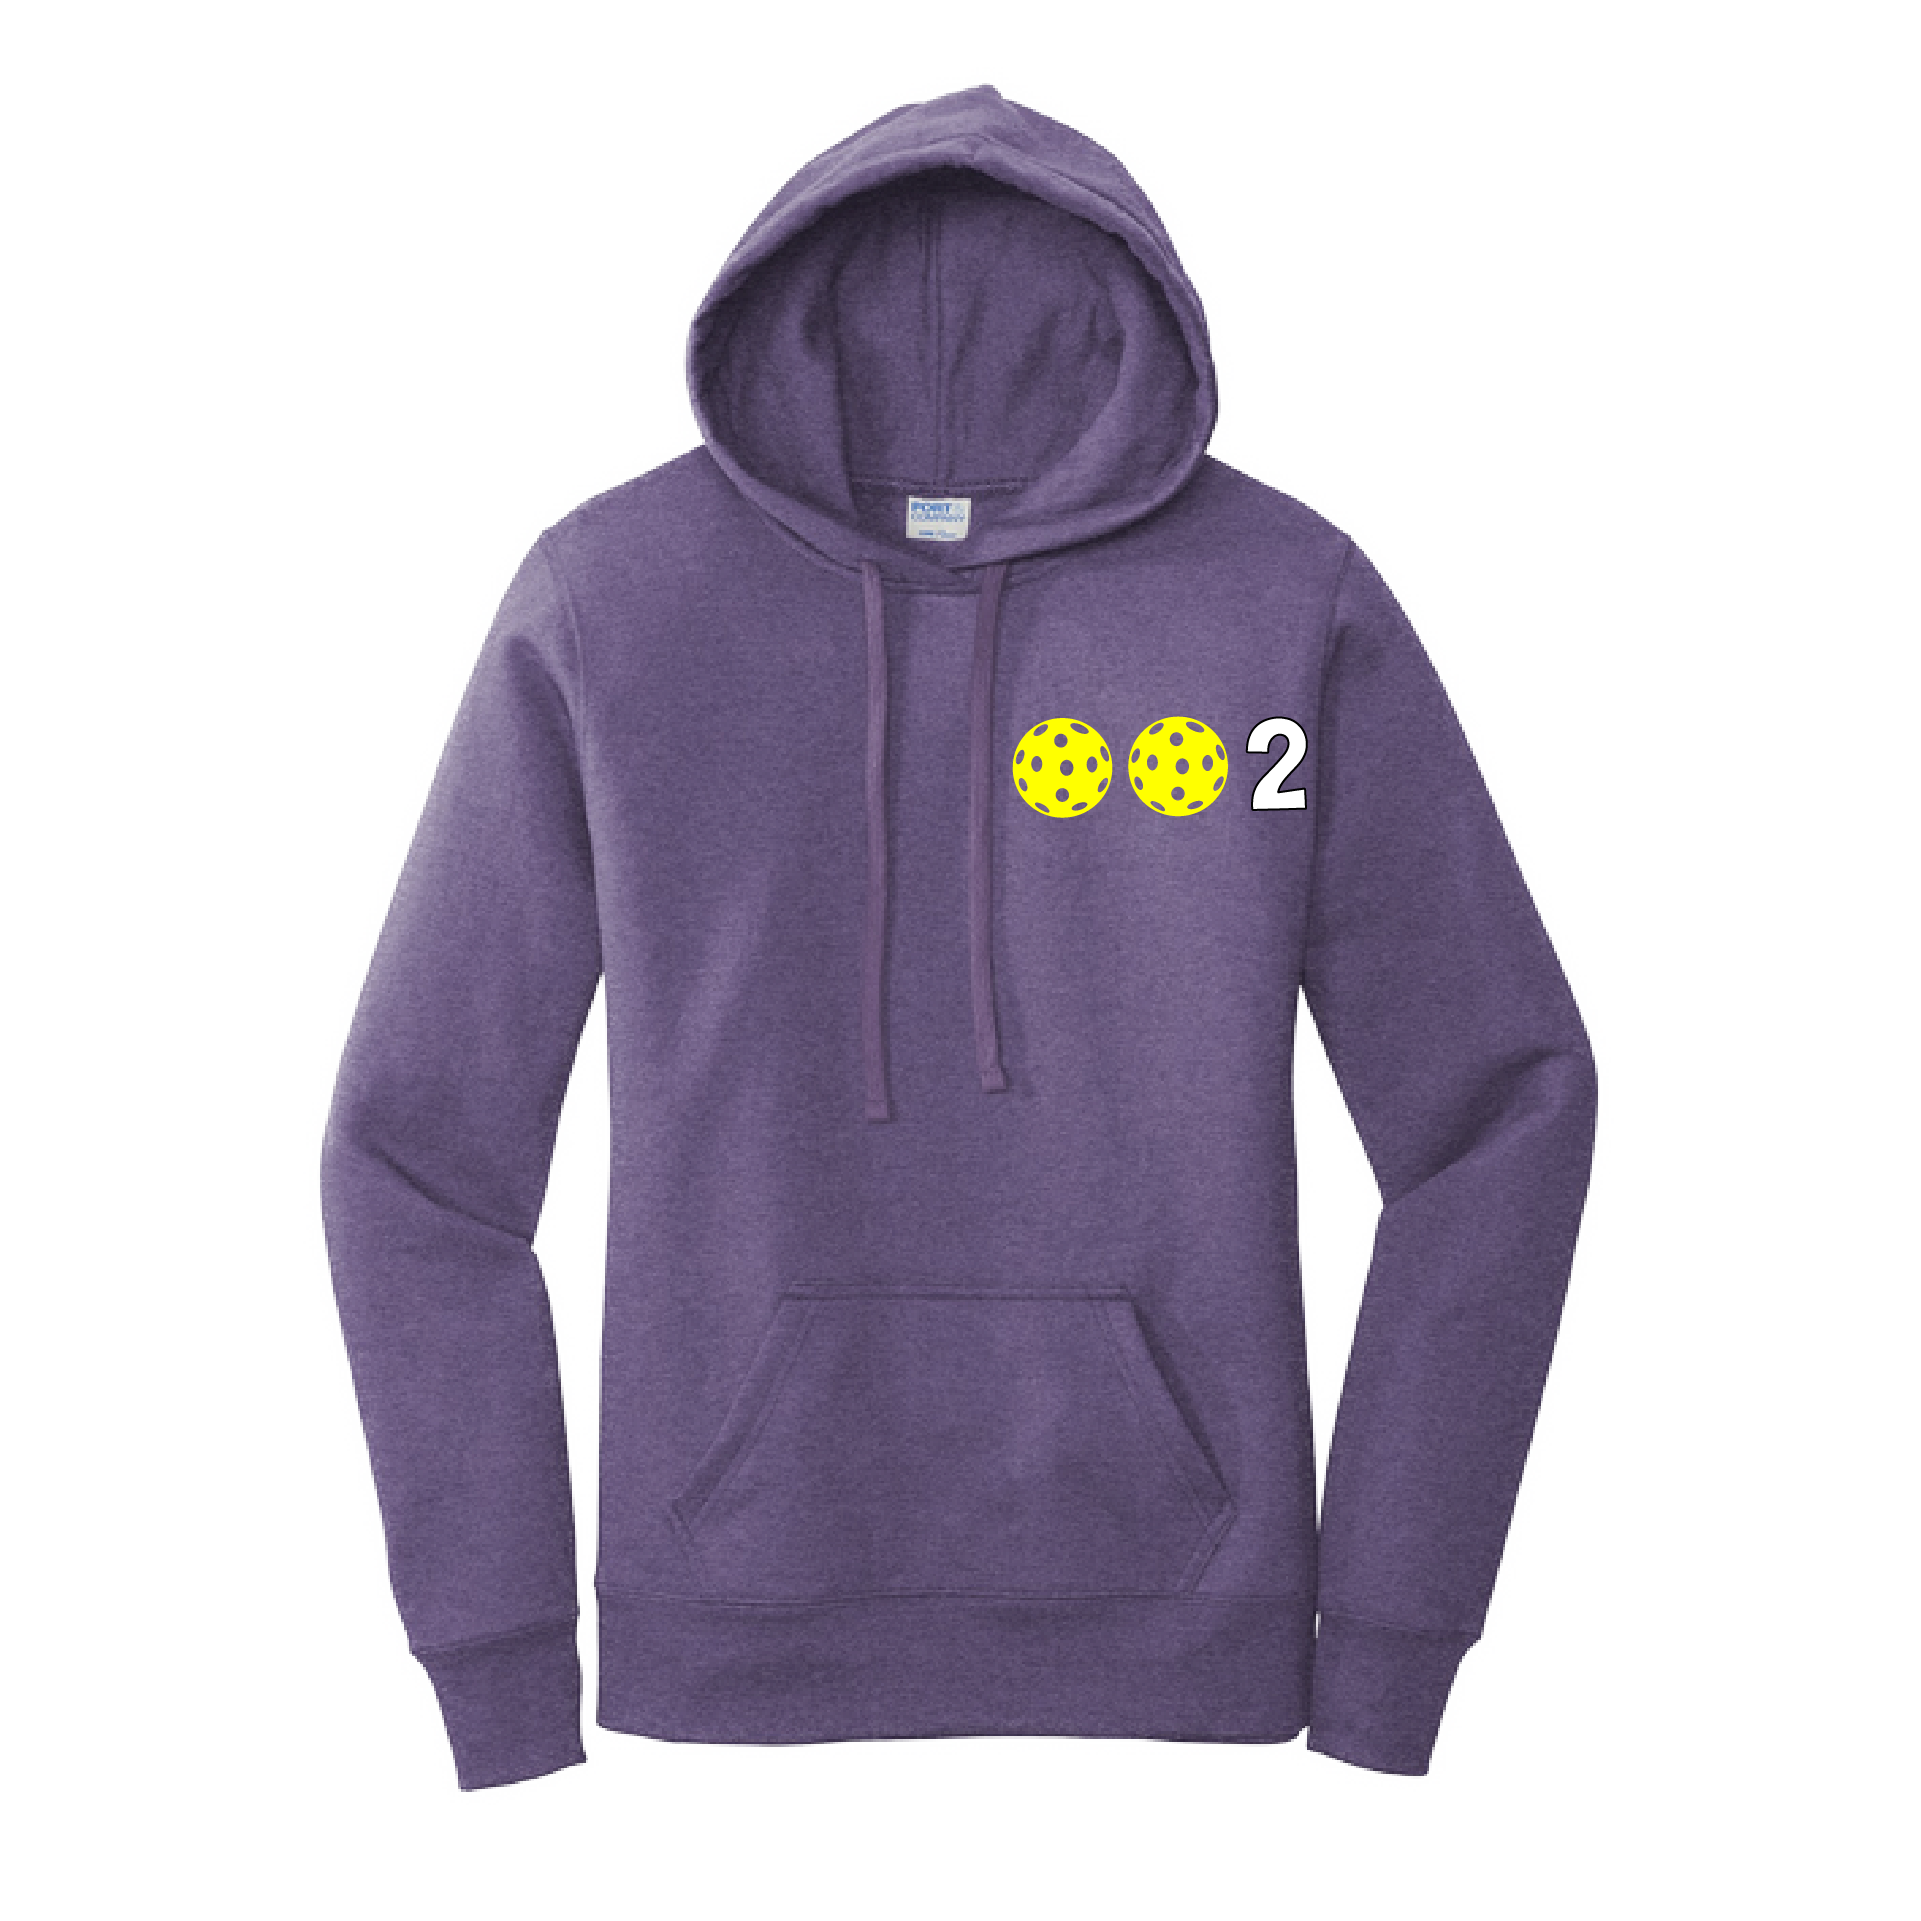 Design: 002 with Customizable Ball color (Yellow, White, Pink, Orange, Purple)  Women's Hooded pullover Sweatshirt: 50/50 Cotton/Poly fleece.  Turn up the volume in this Women's Sweatshirts with its perfect mix of softness and attitude. Ultra soft lined inside with a lined hood also. This is fitted nicely for a women's figure. Front pouch p